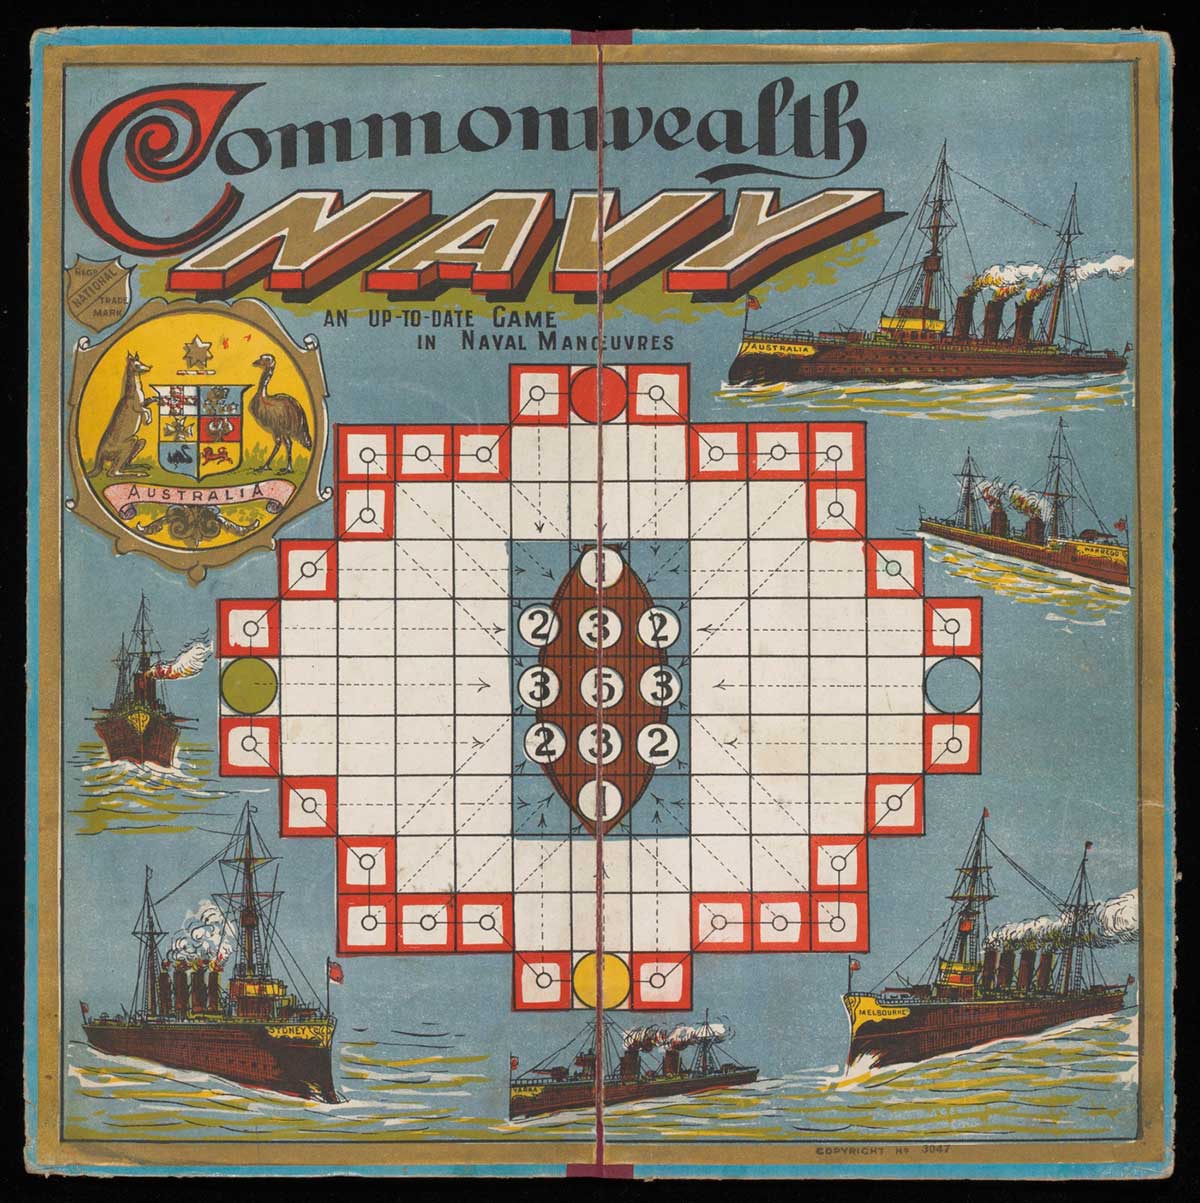 Square game board titled 'Commonwealth Navy', with white game squares at centre. Images of various war ships surround the playing space. - click to view larger image